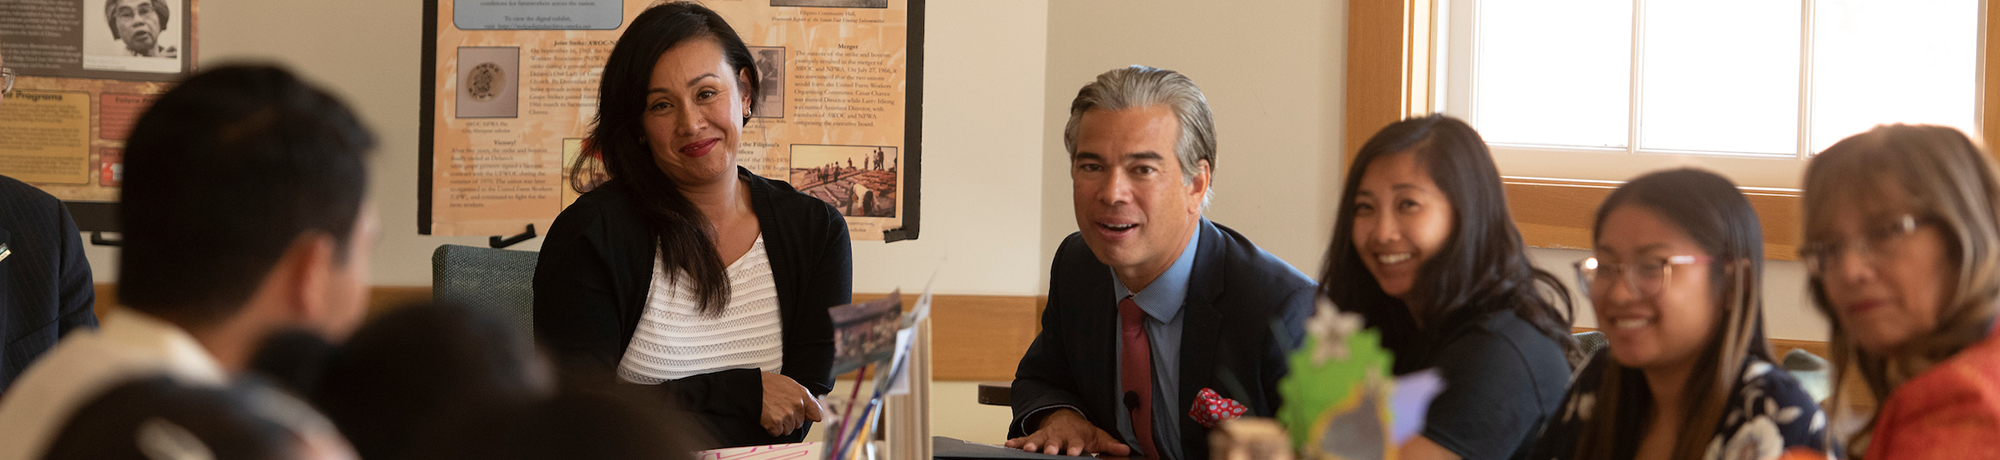 Assemblyman Rob Bonta and professor Robyn Magalit Rodriguez talk with students about the $1 million dollars for the Bulosan Center for Filipino American Studies in funding from the state on October 23, 2019.